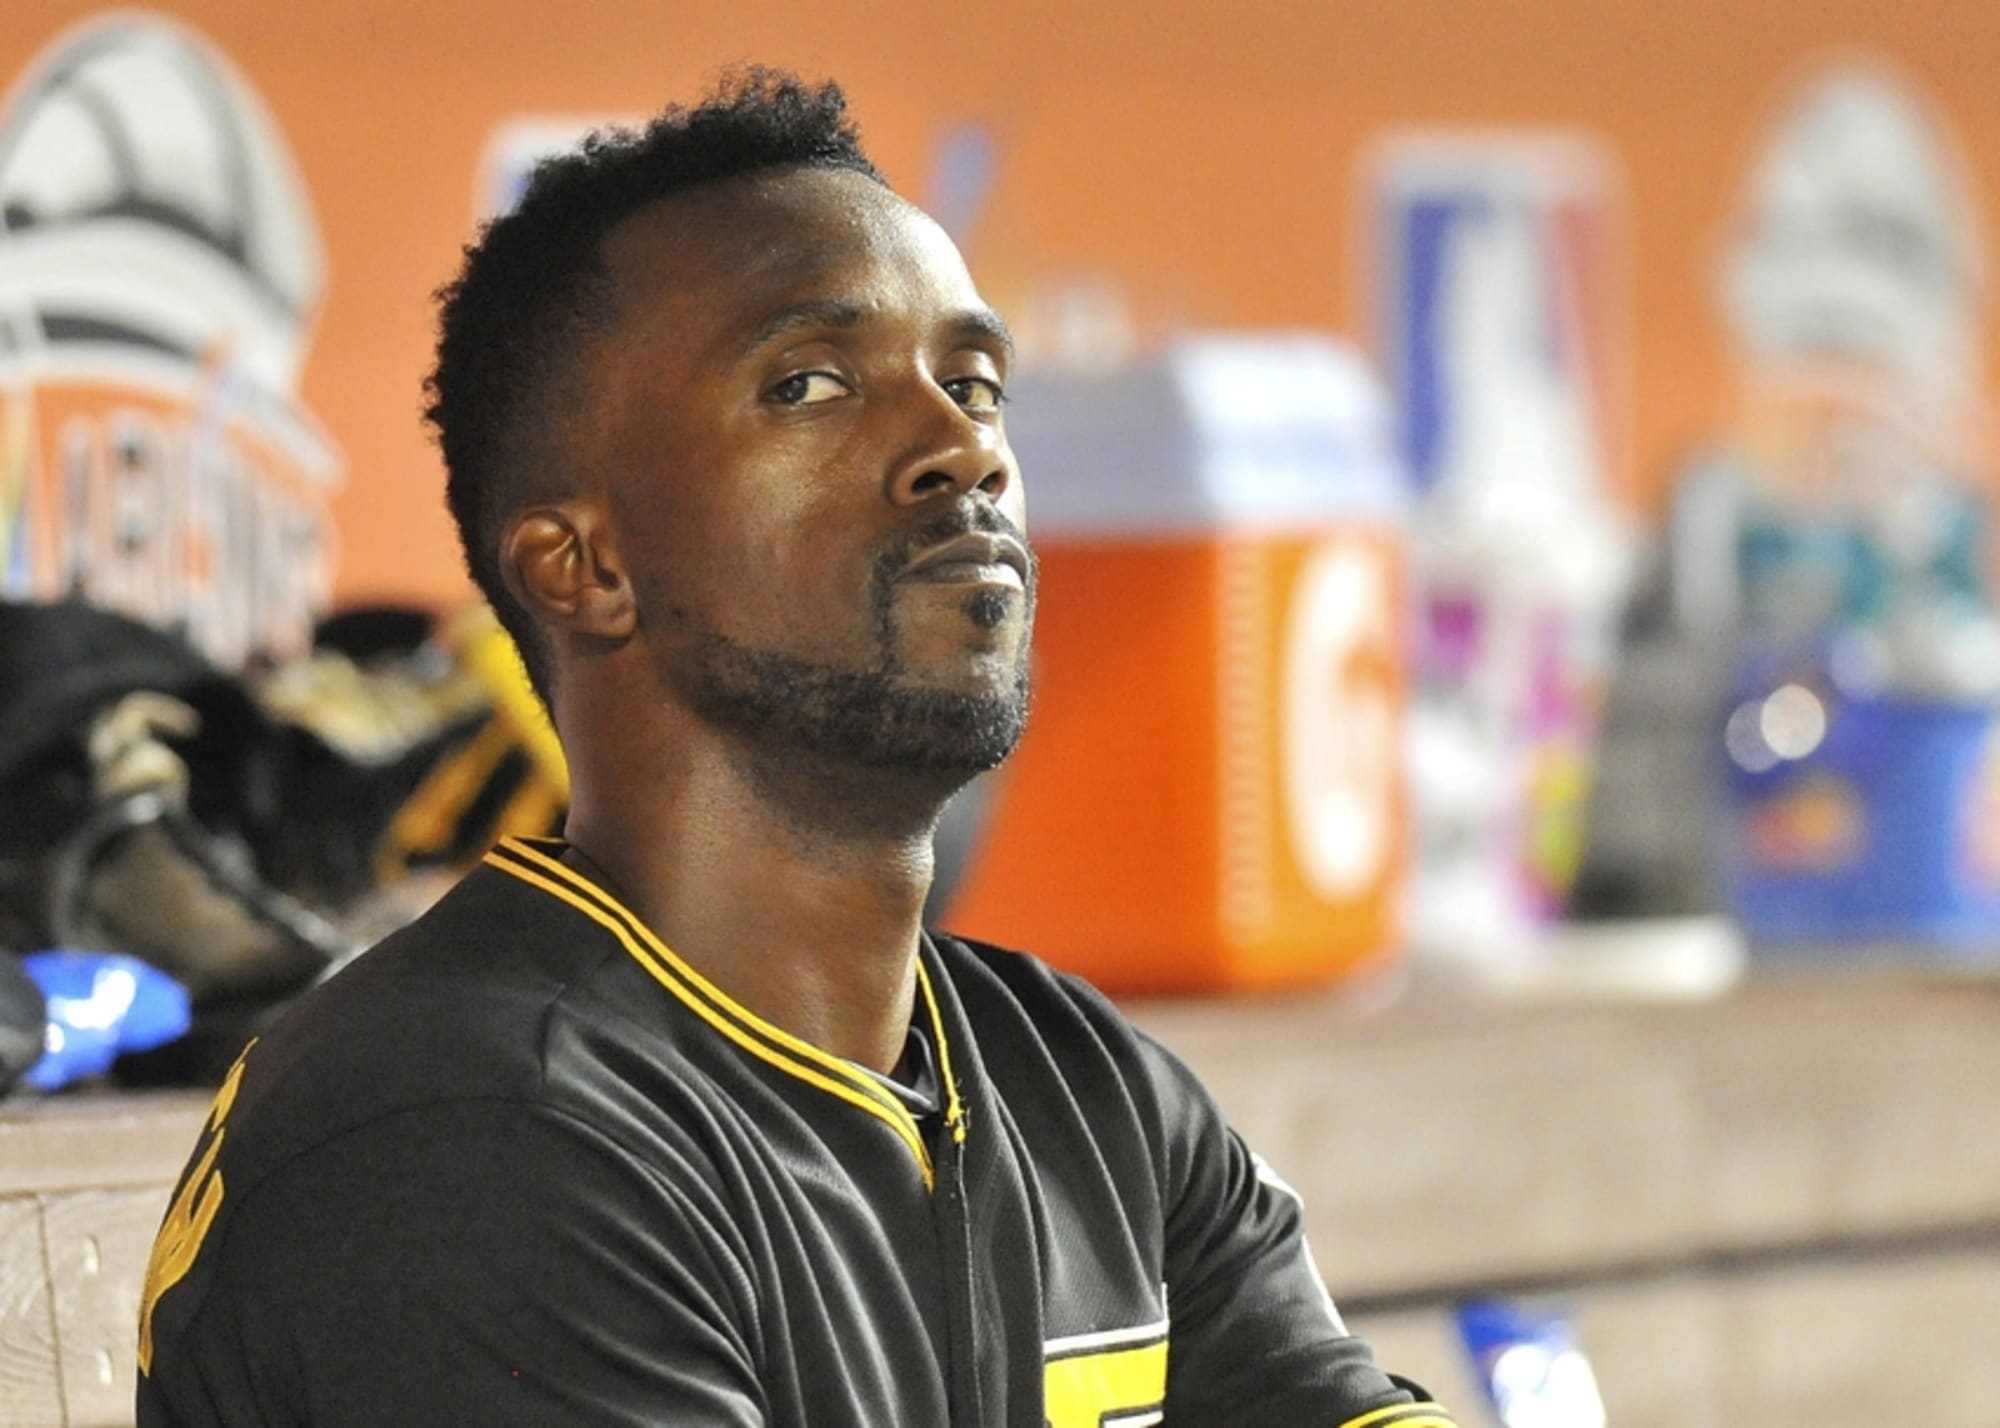 Andrew McCutchen cut his hair for the first time in eight years